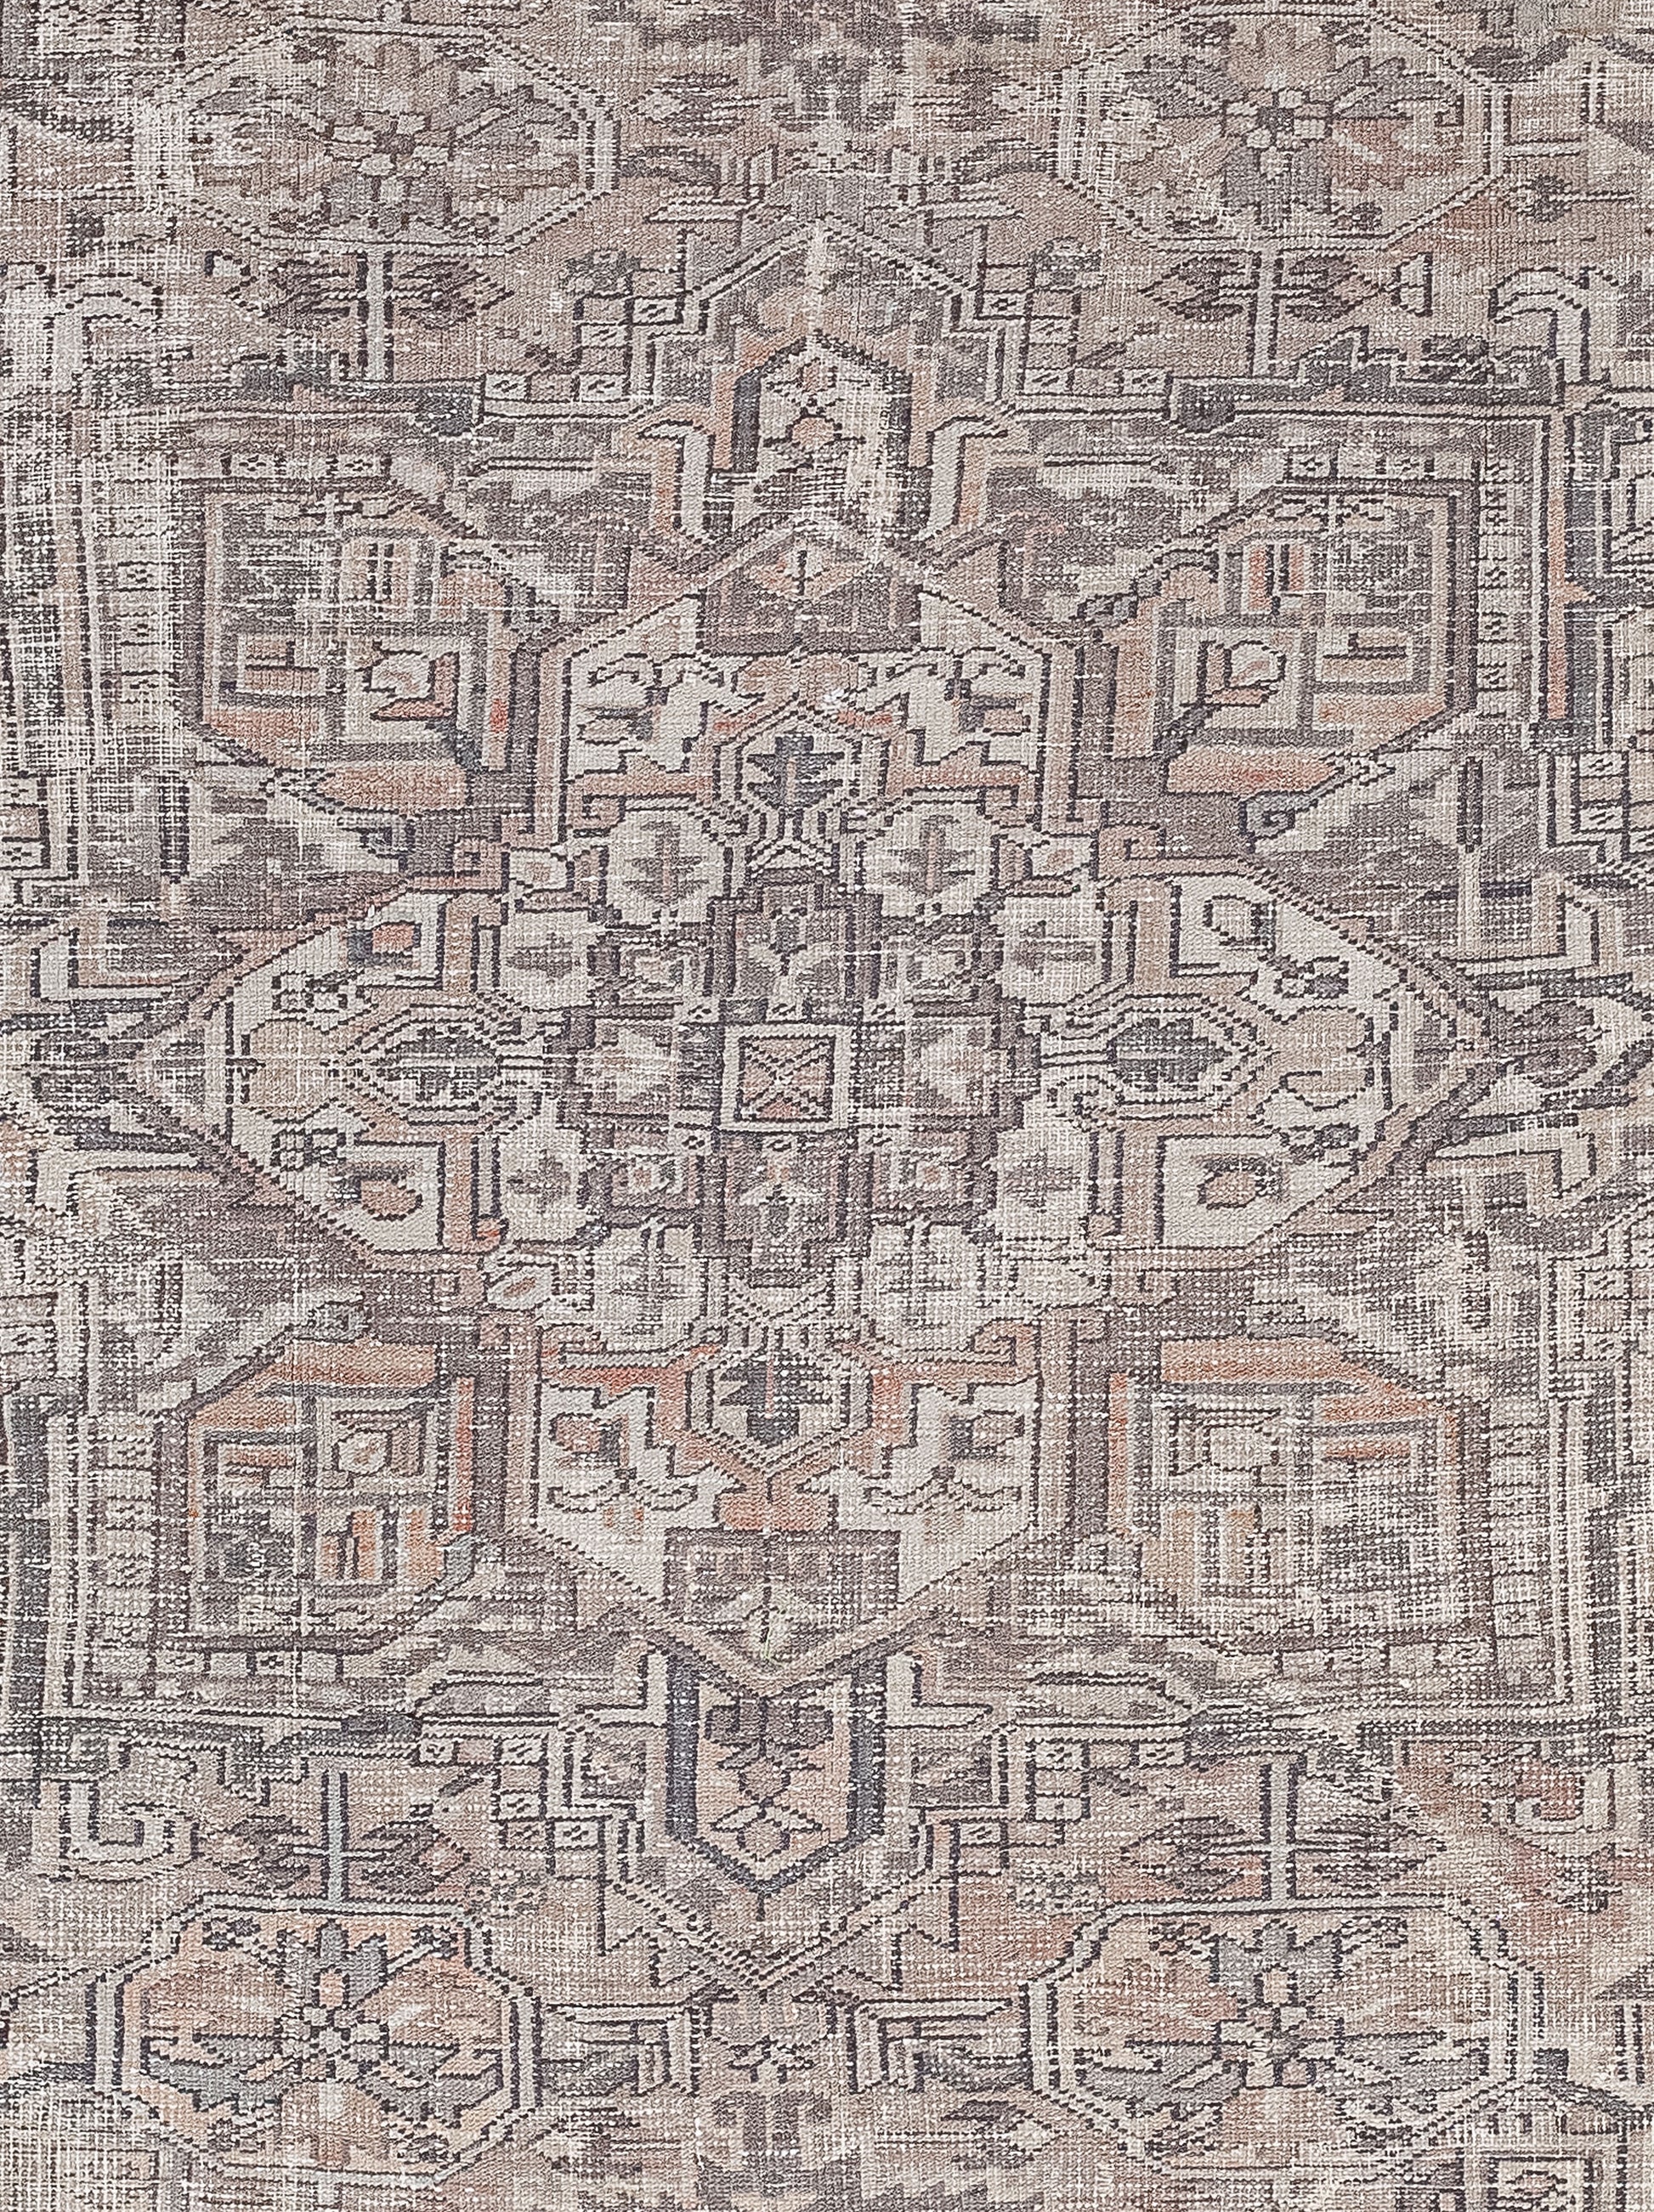 The foreground of the rug tells a story represented with crosses, squares, pyramids, all arranged symmetrically. 